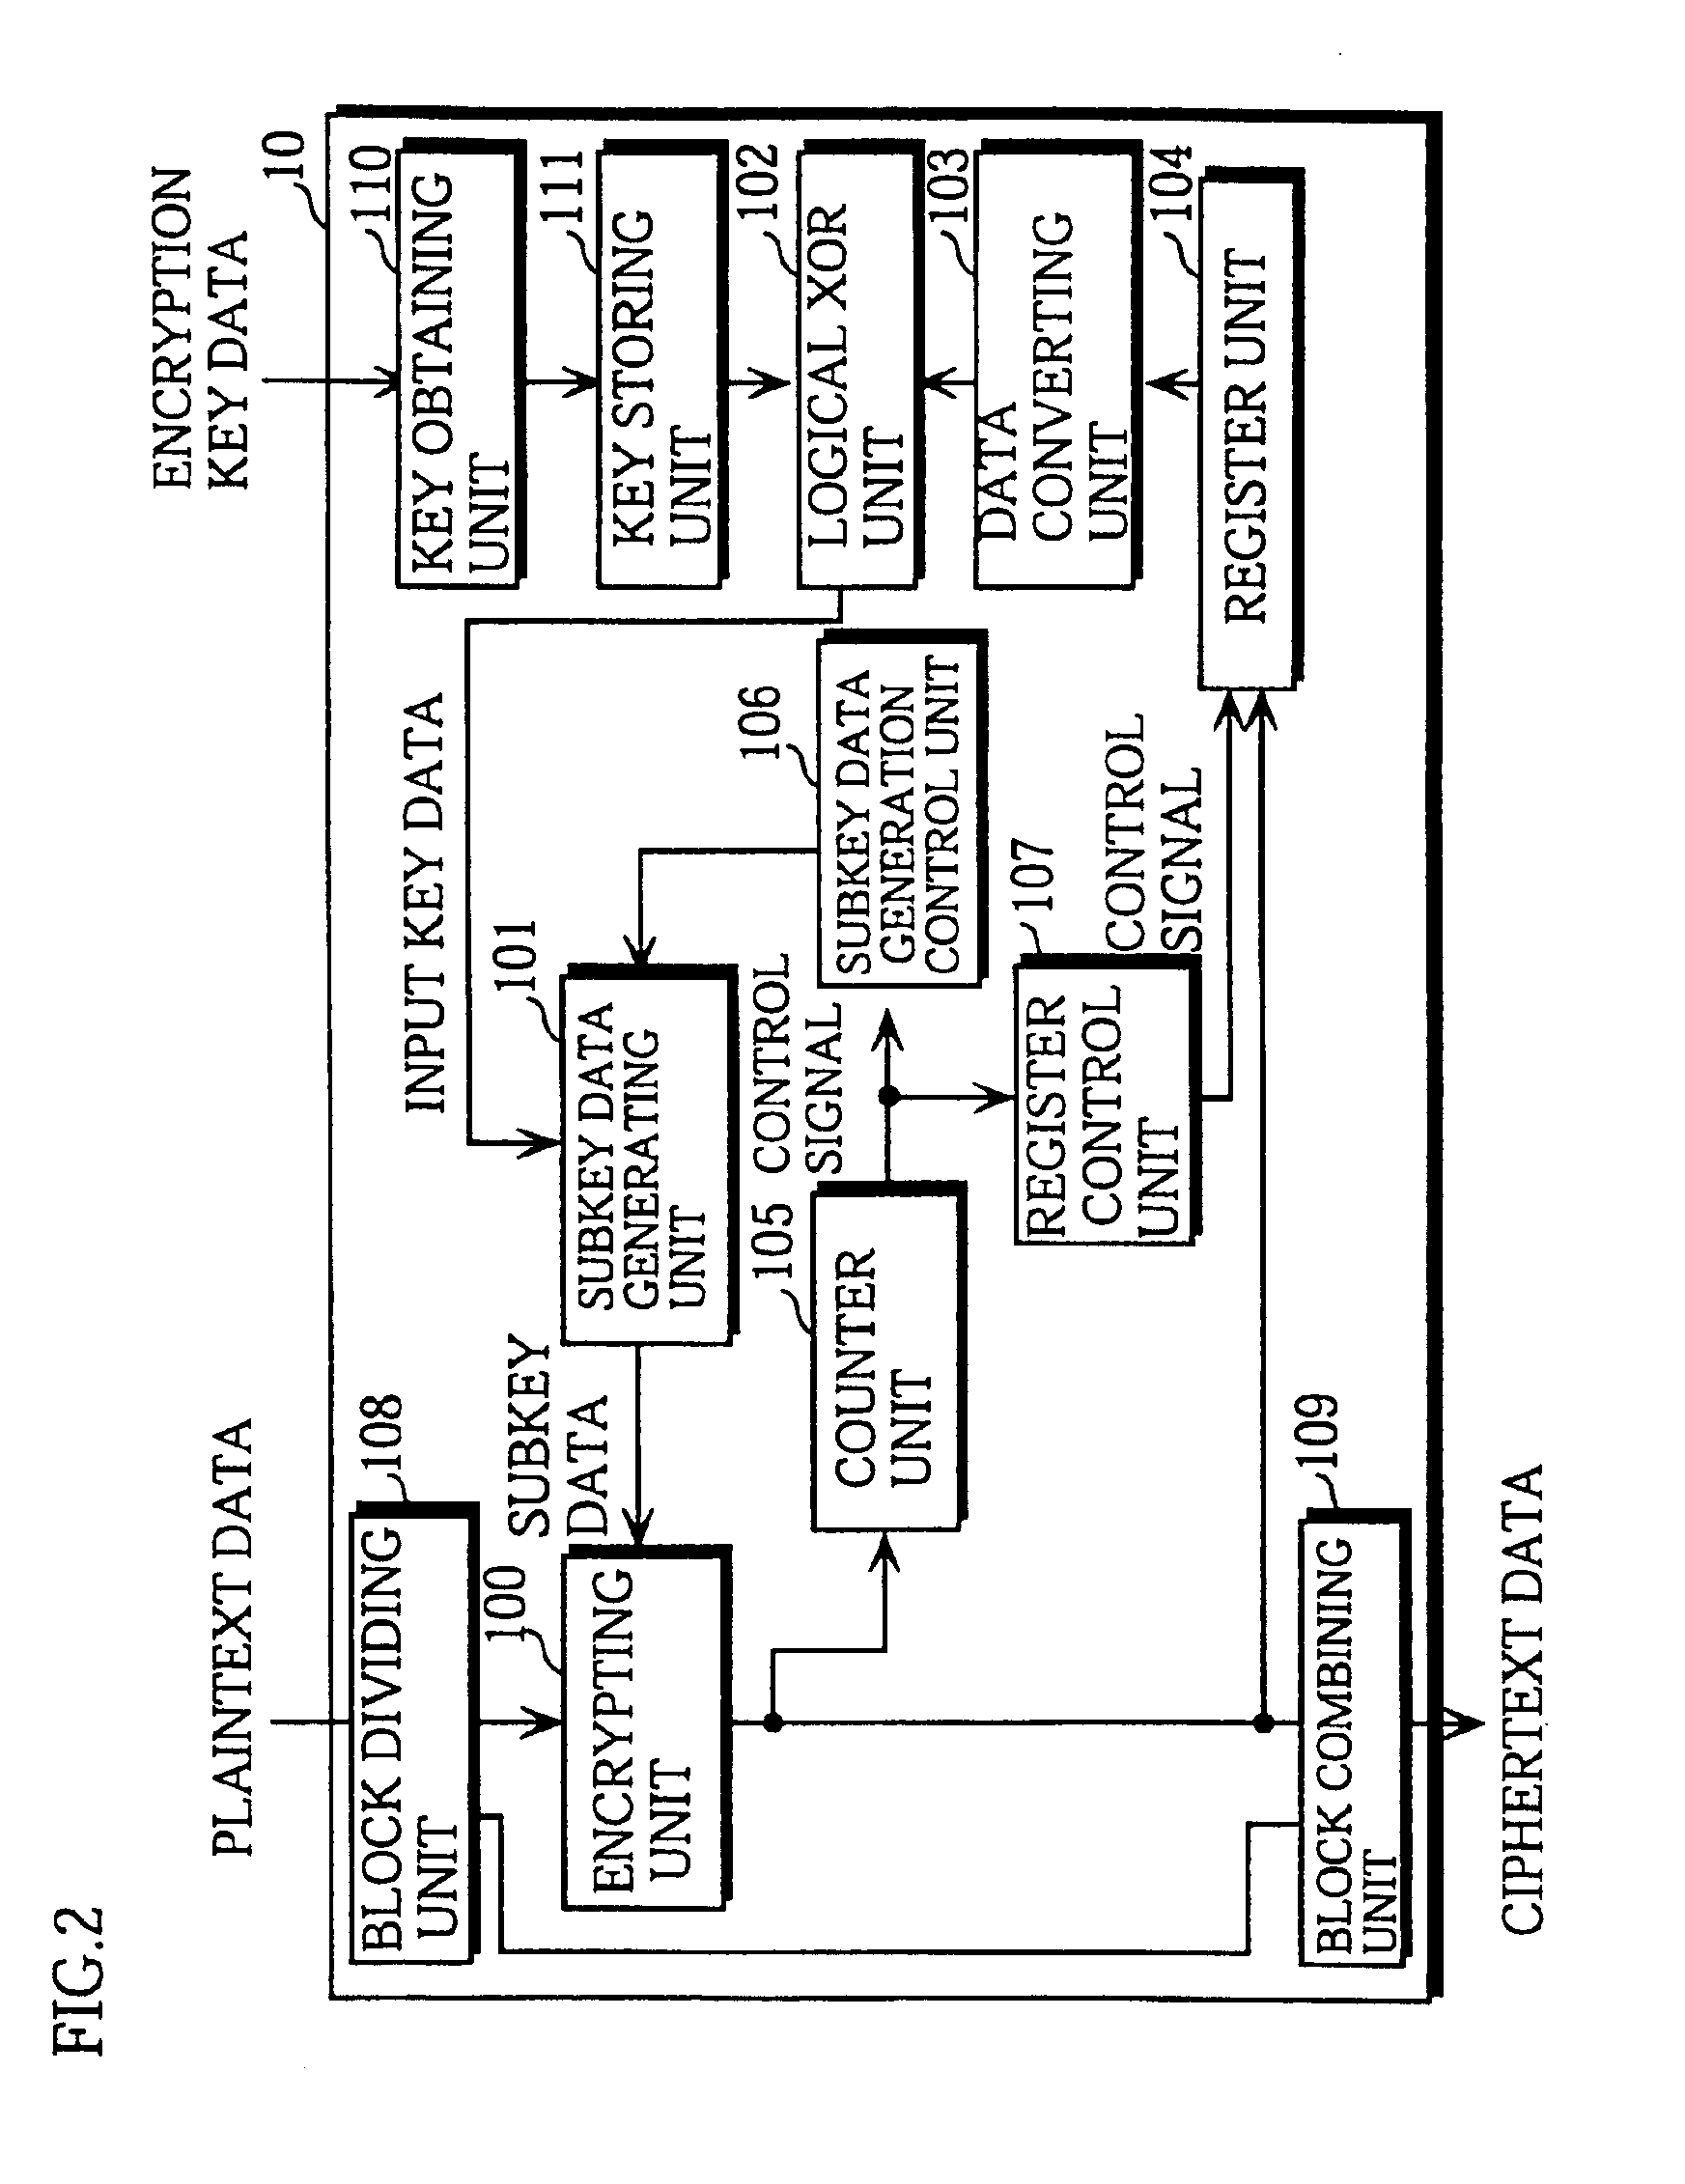 Method of encryption and decryption with block number dependant key sets, each set having a different number of keys